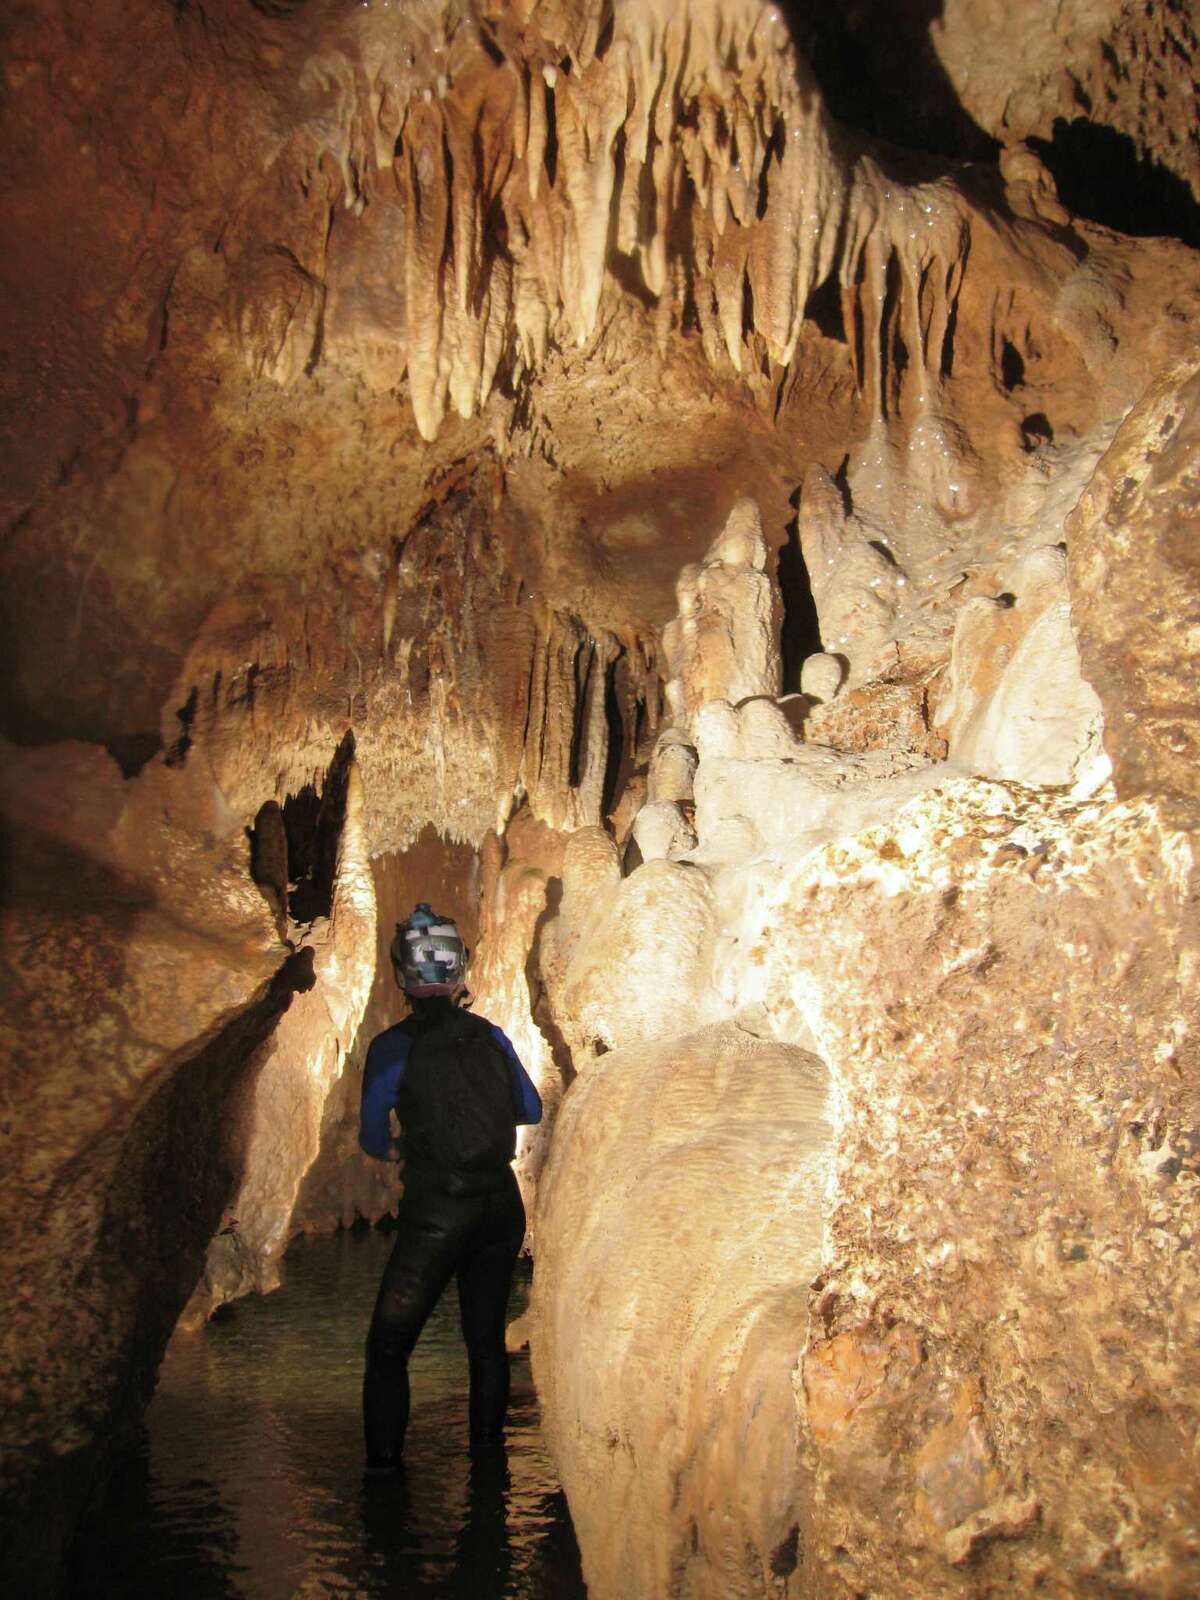 Honey Creek Cave is the longest known cave in Texas, stretching more than 20 miles. It is continuously "growing" because cavers are still exploring the huge underground formation and it is a tributary of the Guadalupe River.